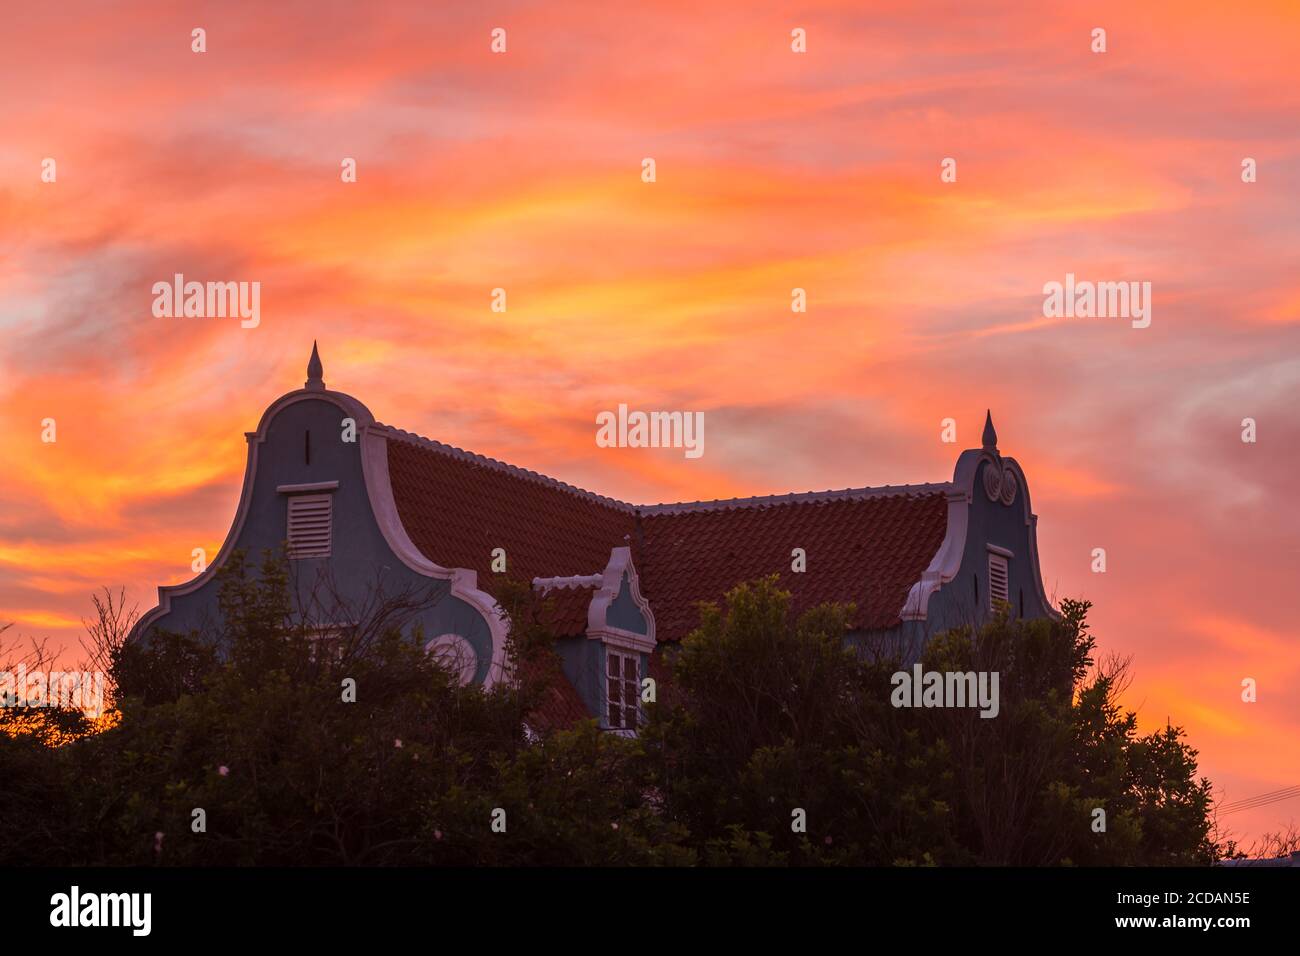 Sunset clouds behind an historic building with Dutch colonial architecture in the Otrobanda district of Willemstad, the capital of the Caribbean islan Stock Photo